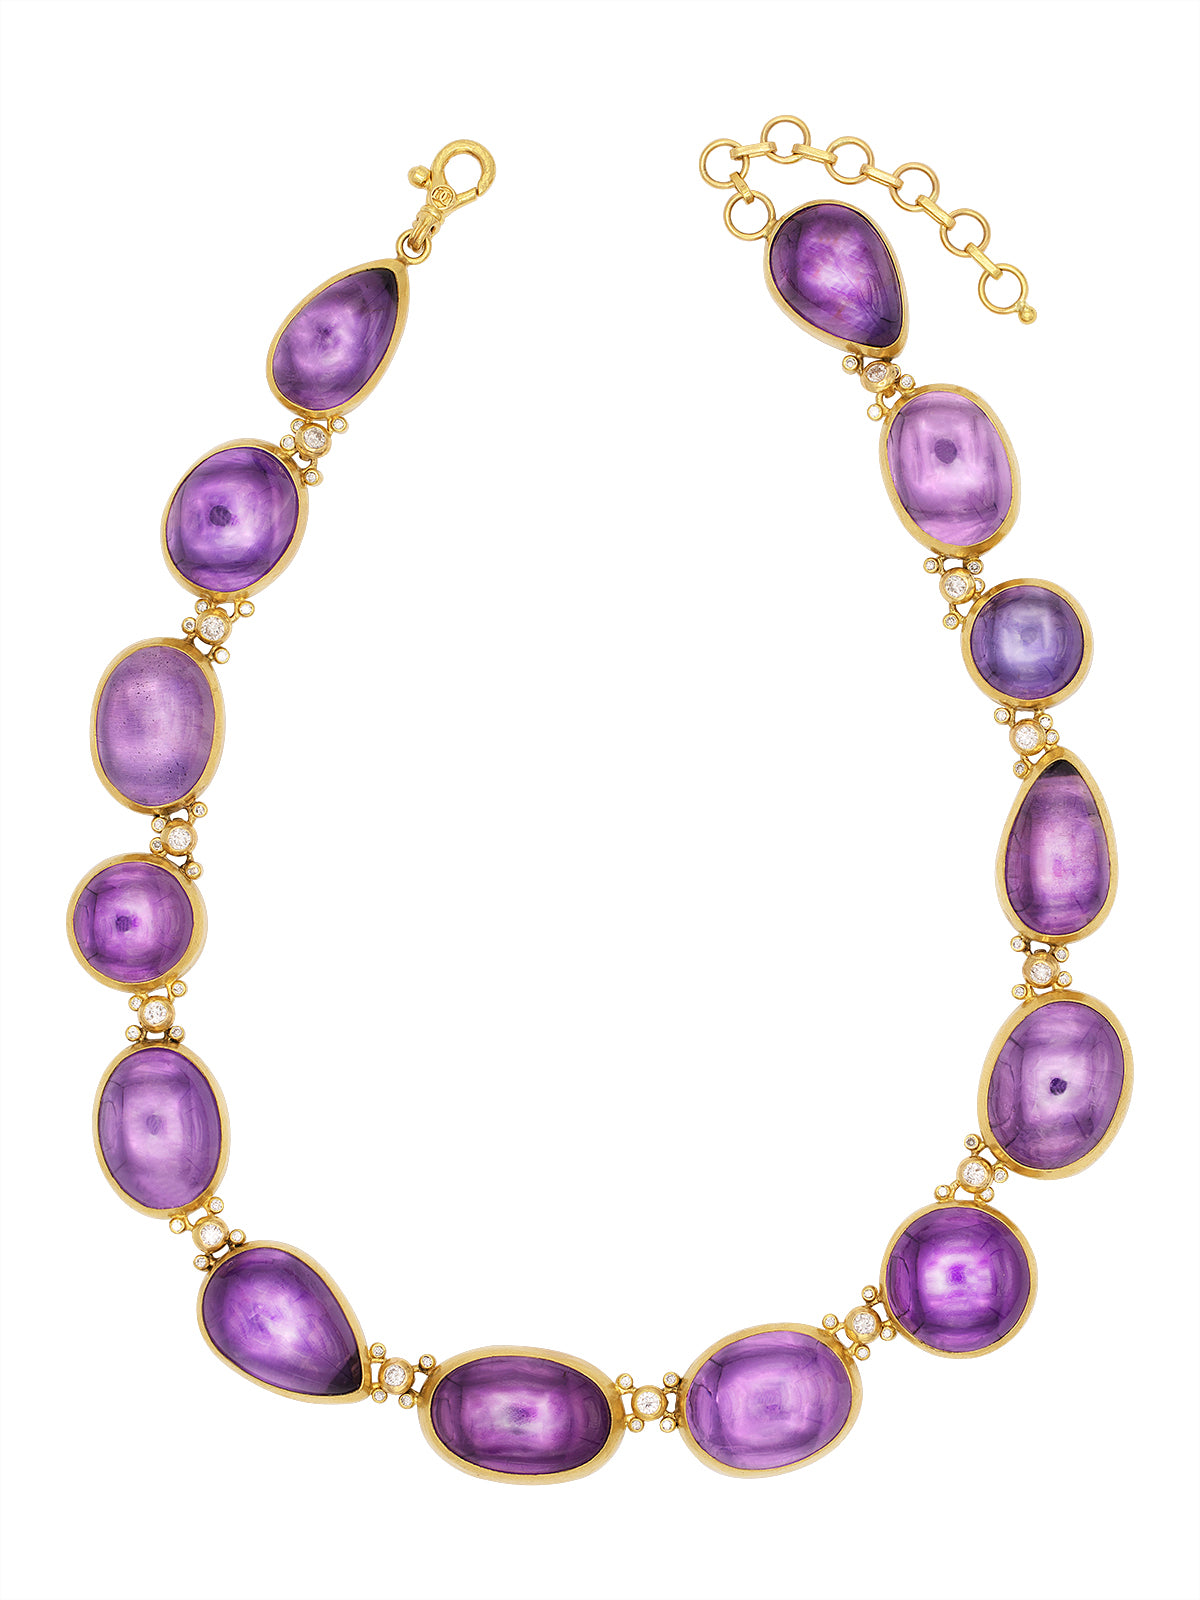 GURHAN, GURHAN Rune Gold All Around Short Necklace, Butterfly Links, with Amethyst and Diamond